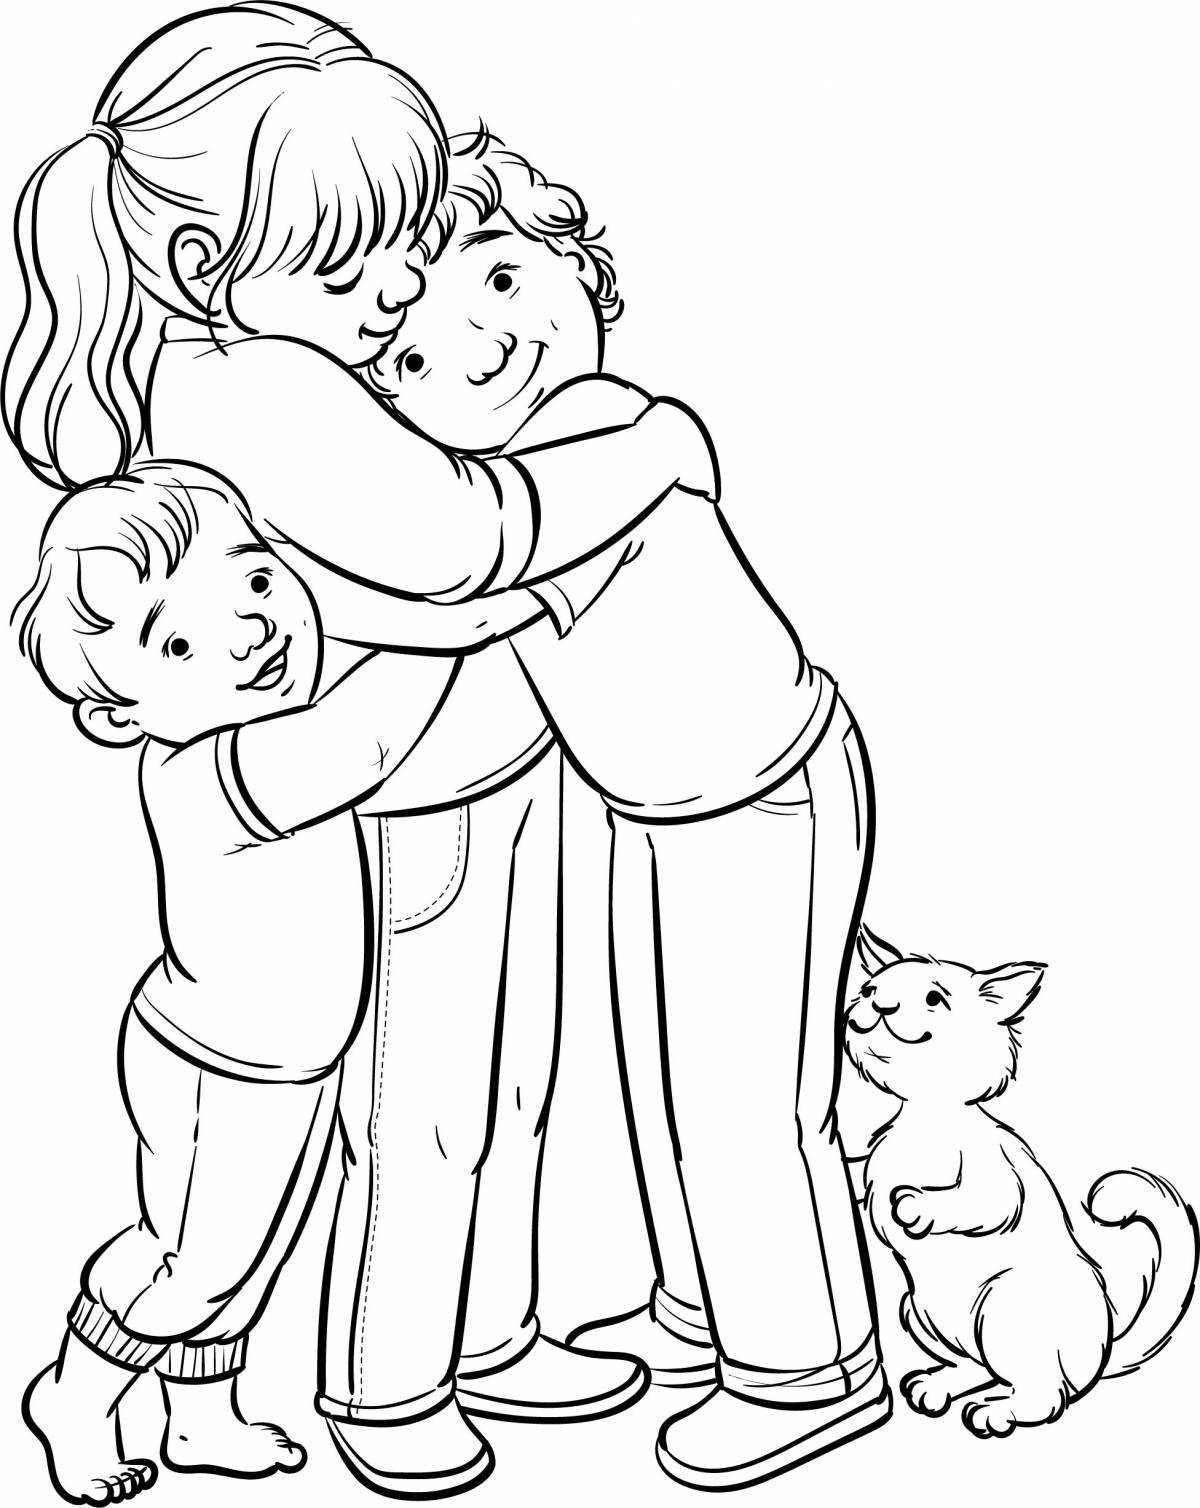 Happy day coloring page for kids